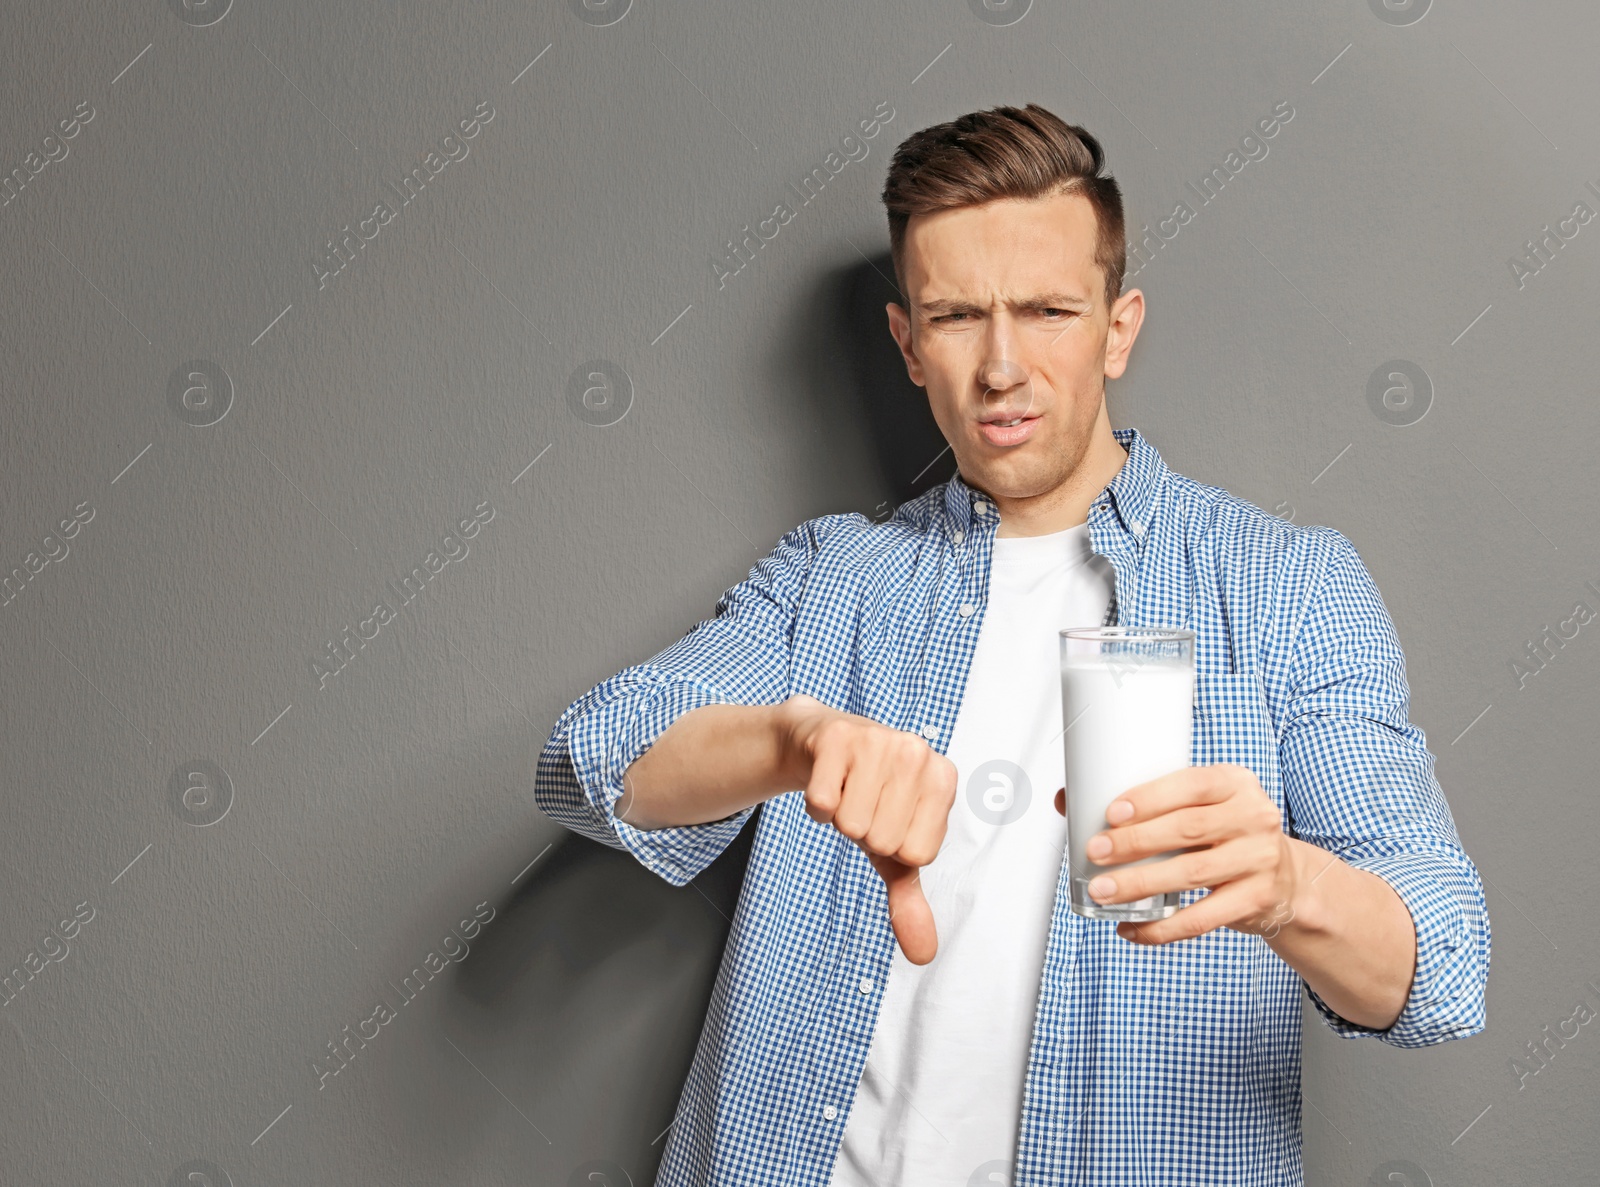 Photo of Young man with dairy allergy holding glass of milk on grey background